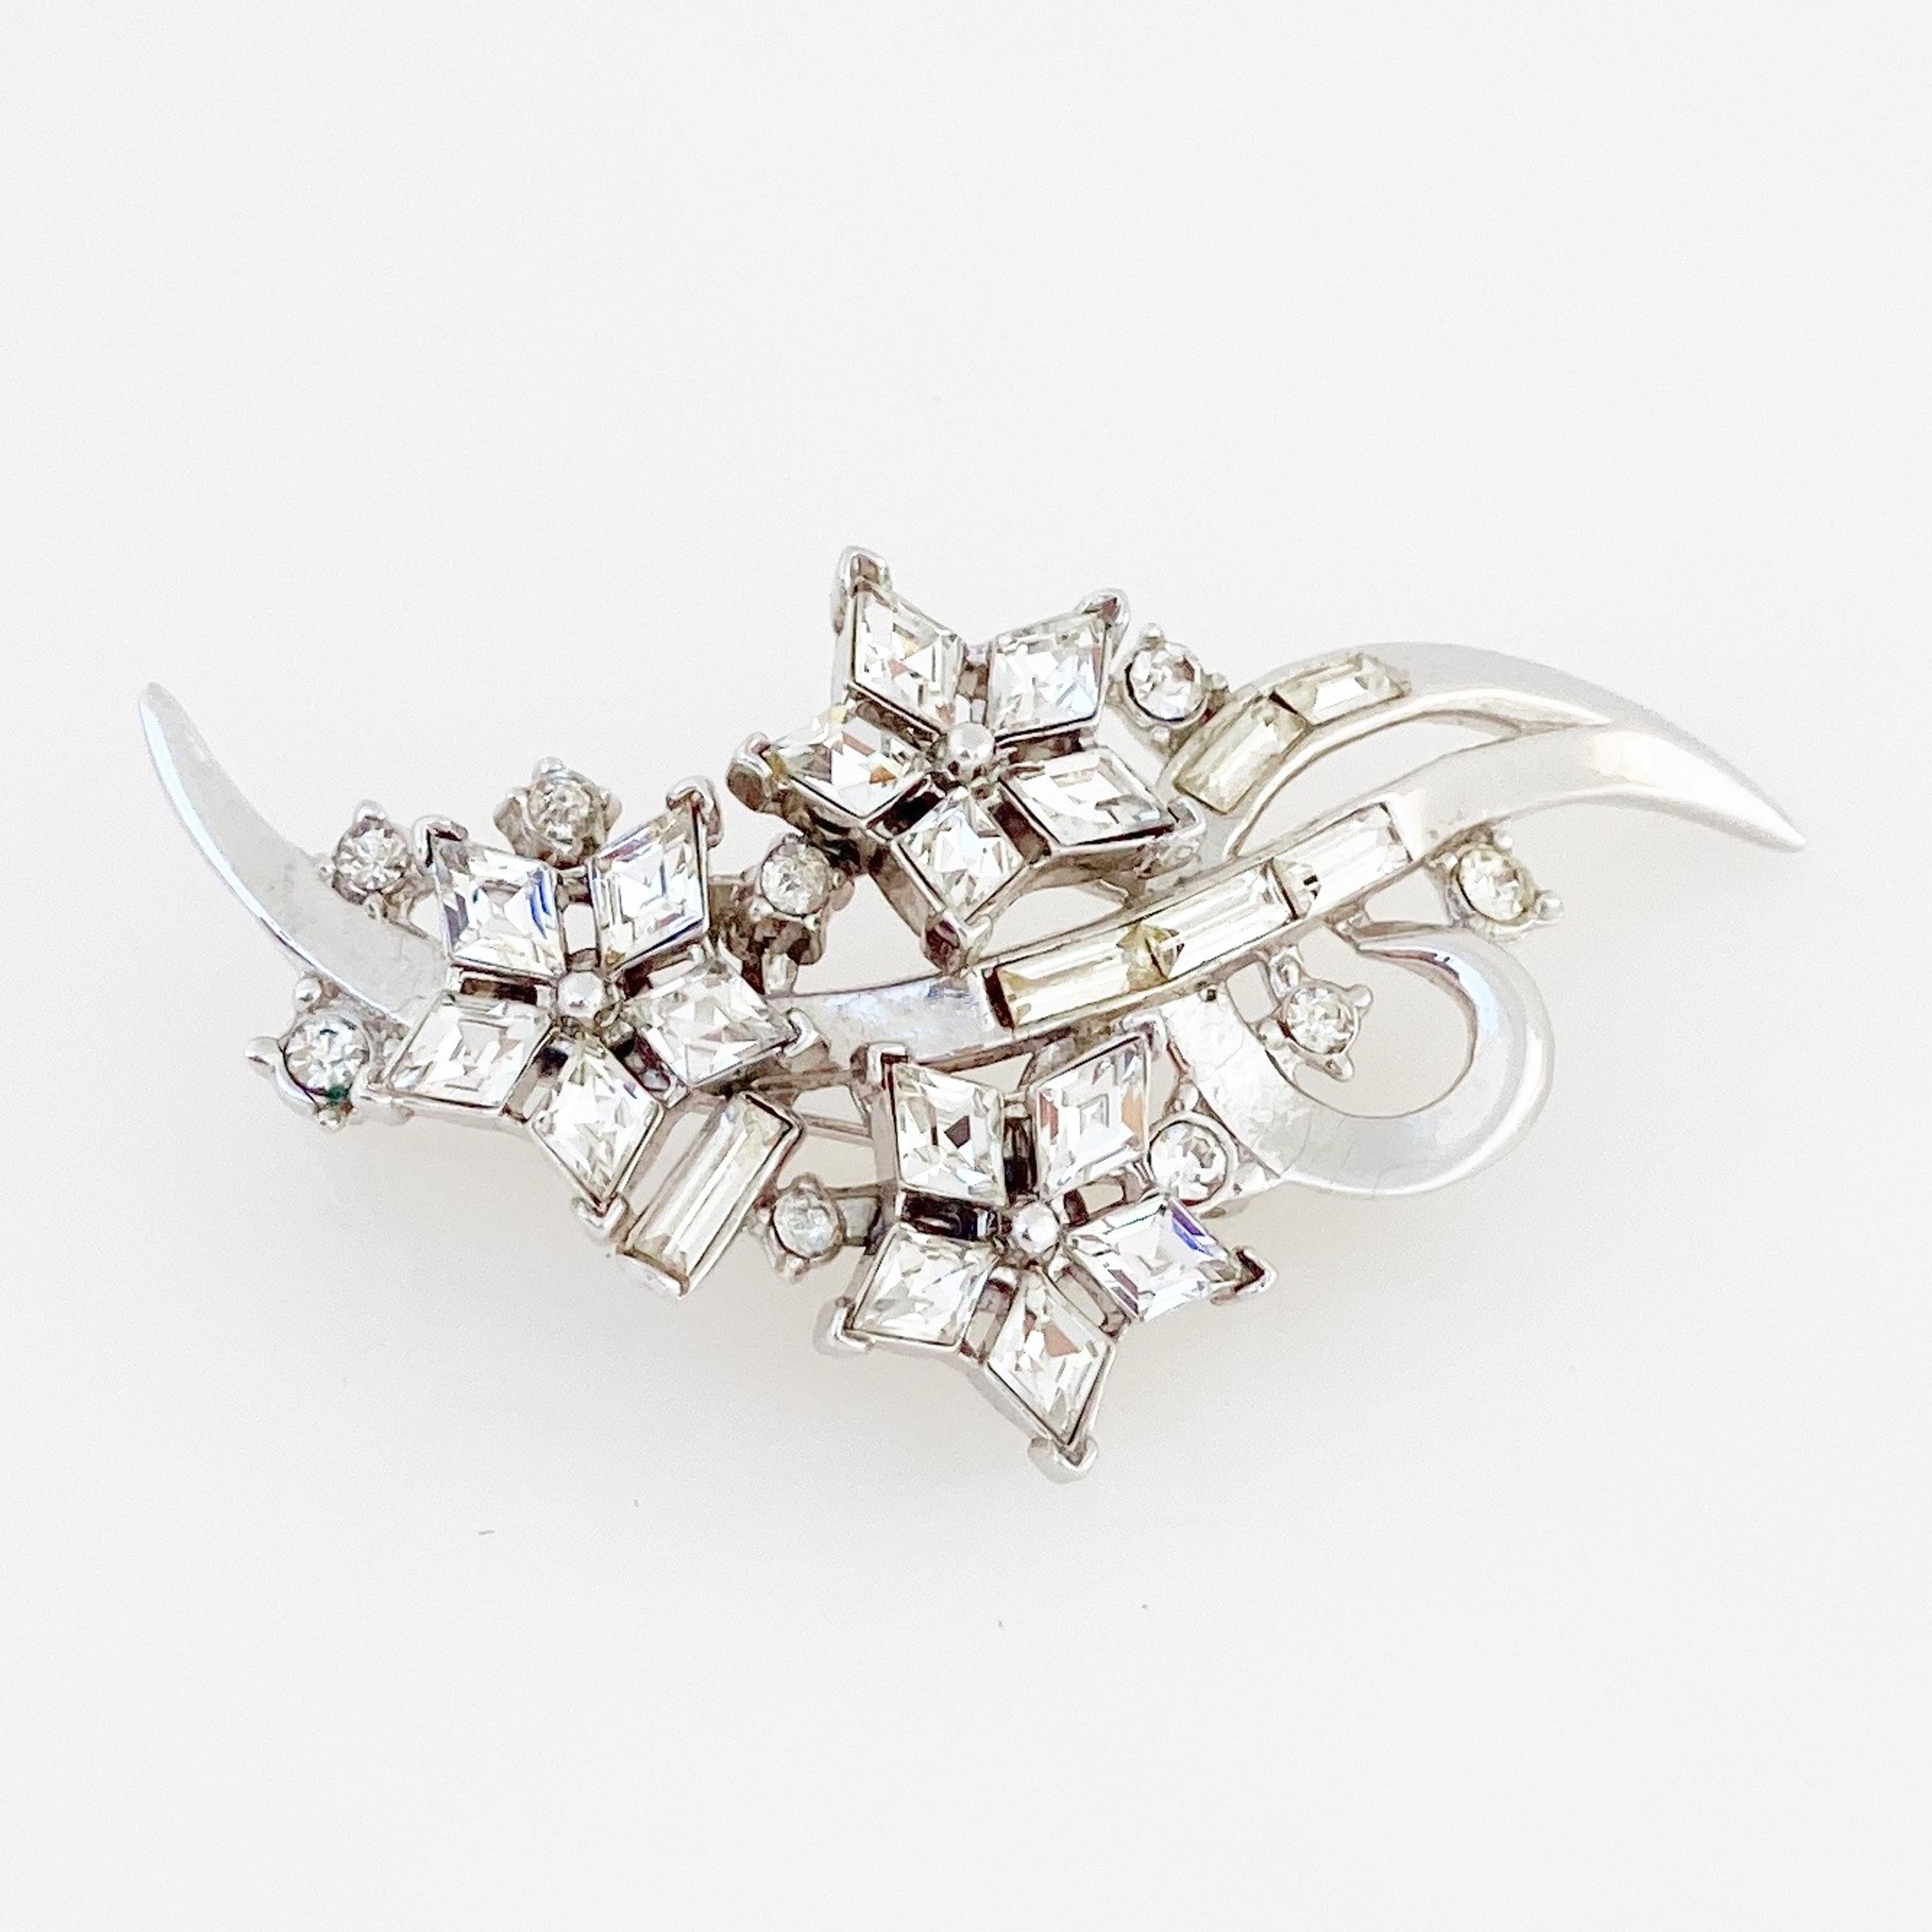 Modern 1950s Crystal Twinkle Series Floral Brooch By Alfred Philippe For Crown Trifari